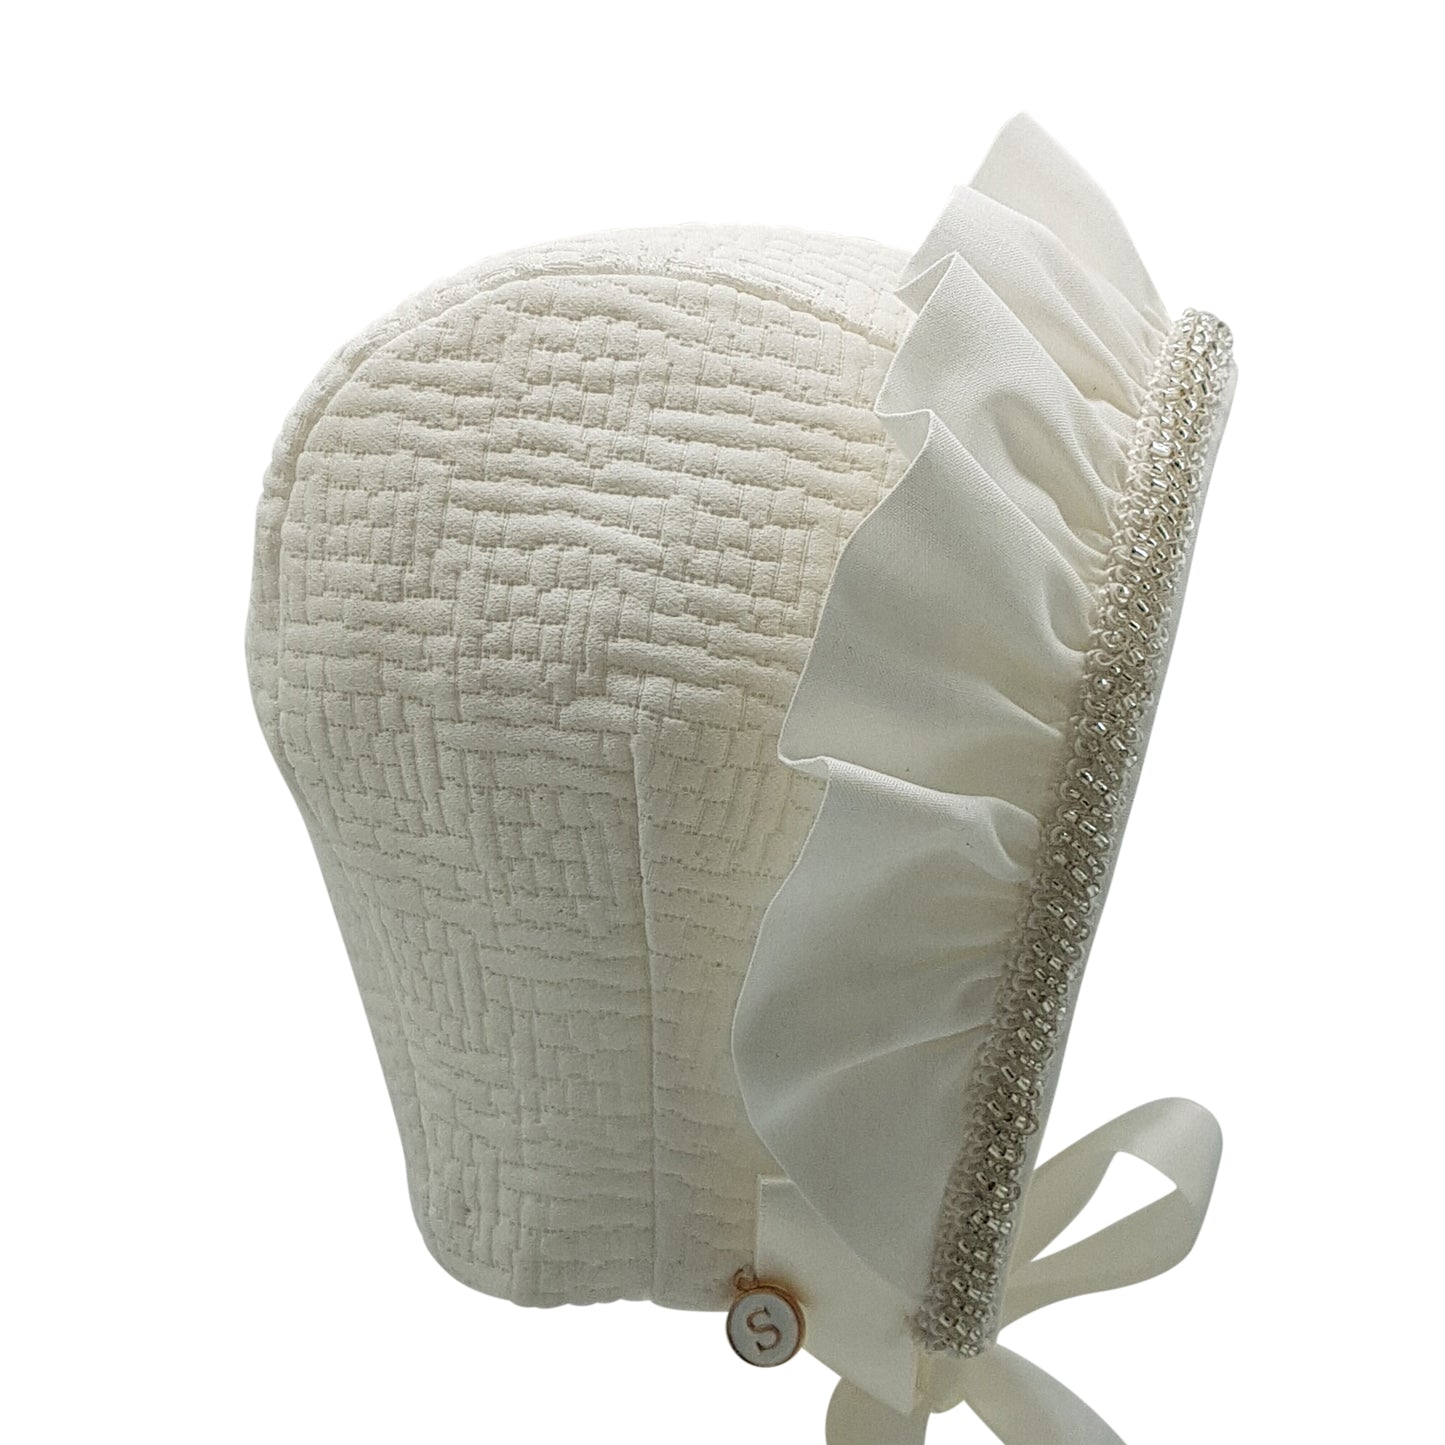 Exclusive Bonnet, Ivory Jacquard Cap Style with frill and bead trim